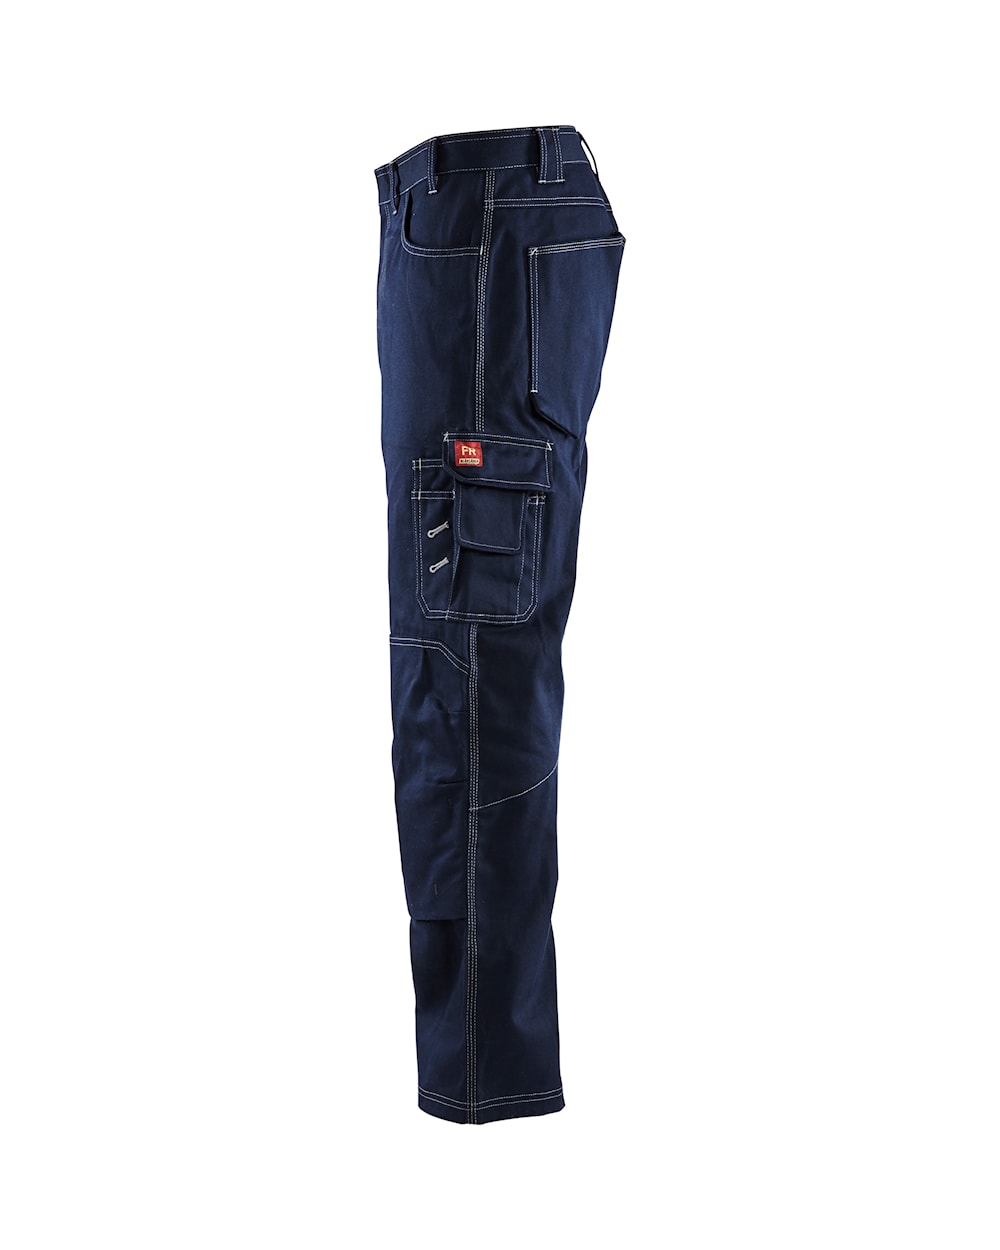 Blaklader 1676 Fire Resistant Pants from Columbia Safety